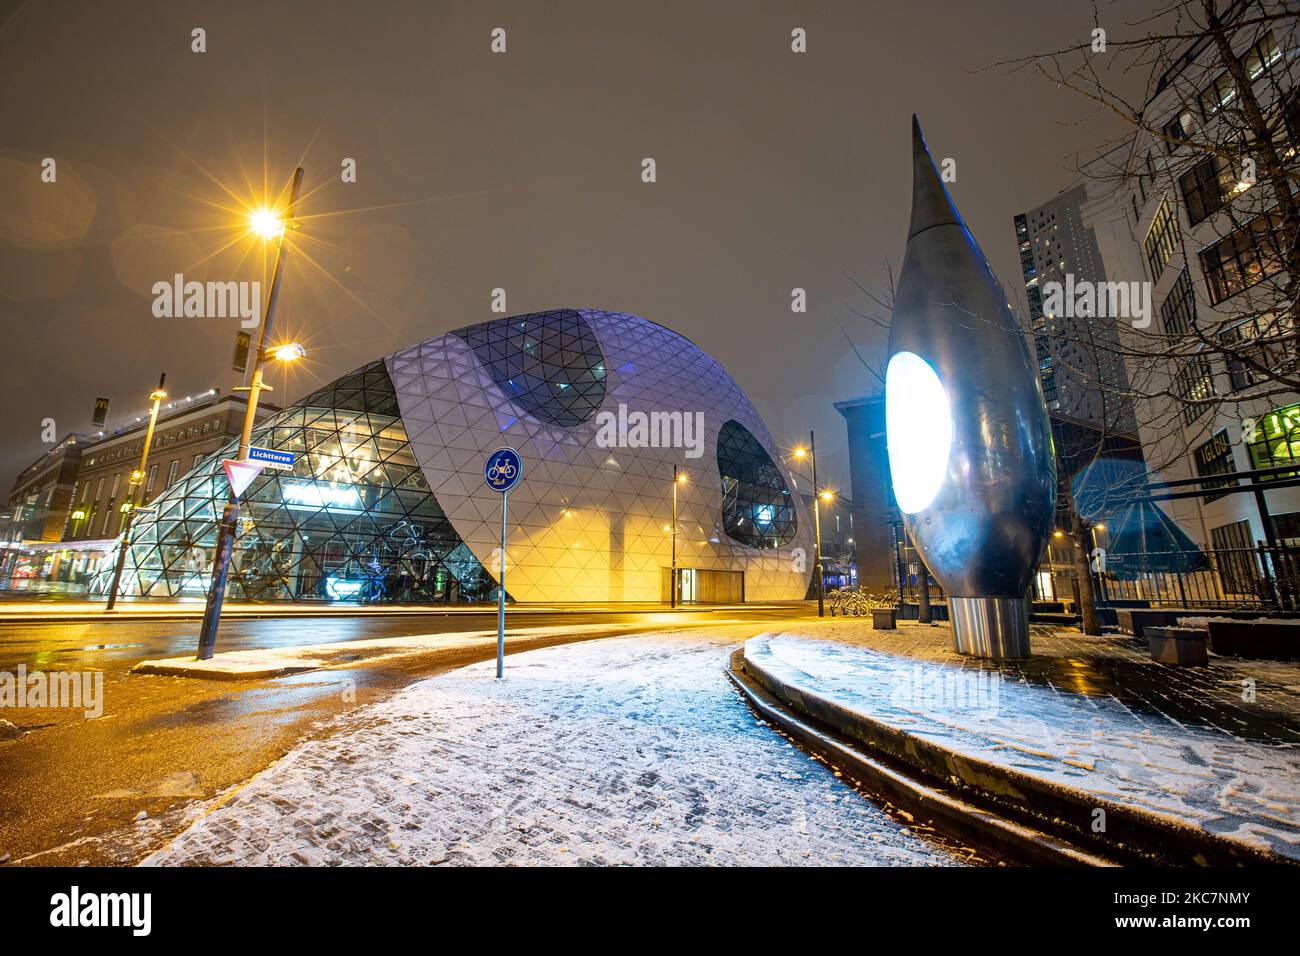 De Blob during the snowfall, a building designed by the Italian architect Massimiliano Fuksas, Night long exposure photography images of snow-covered and illuminated with city lights Eindhoven city center after the snowfall. Daily life in the Netherlands with the first snowfall of the year covering almost everything the cold weather shows subzero temperature. The chilly condition with snow and ice changed soon according to the forecast, the freezing condition will not last more than a day. Eindhoven, the Netherlands on January 16, 2020 (Photo by Nicolas Economou/NurPhoto) Stock Photo